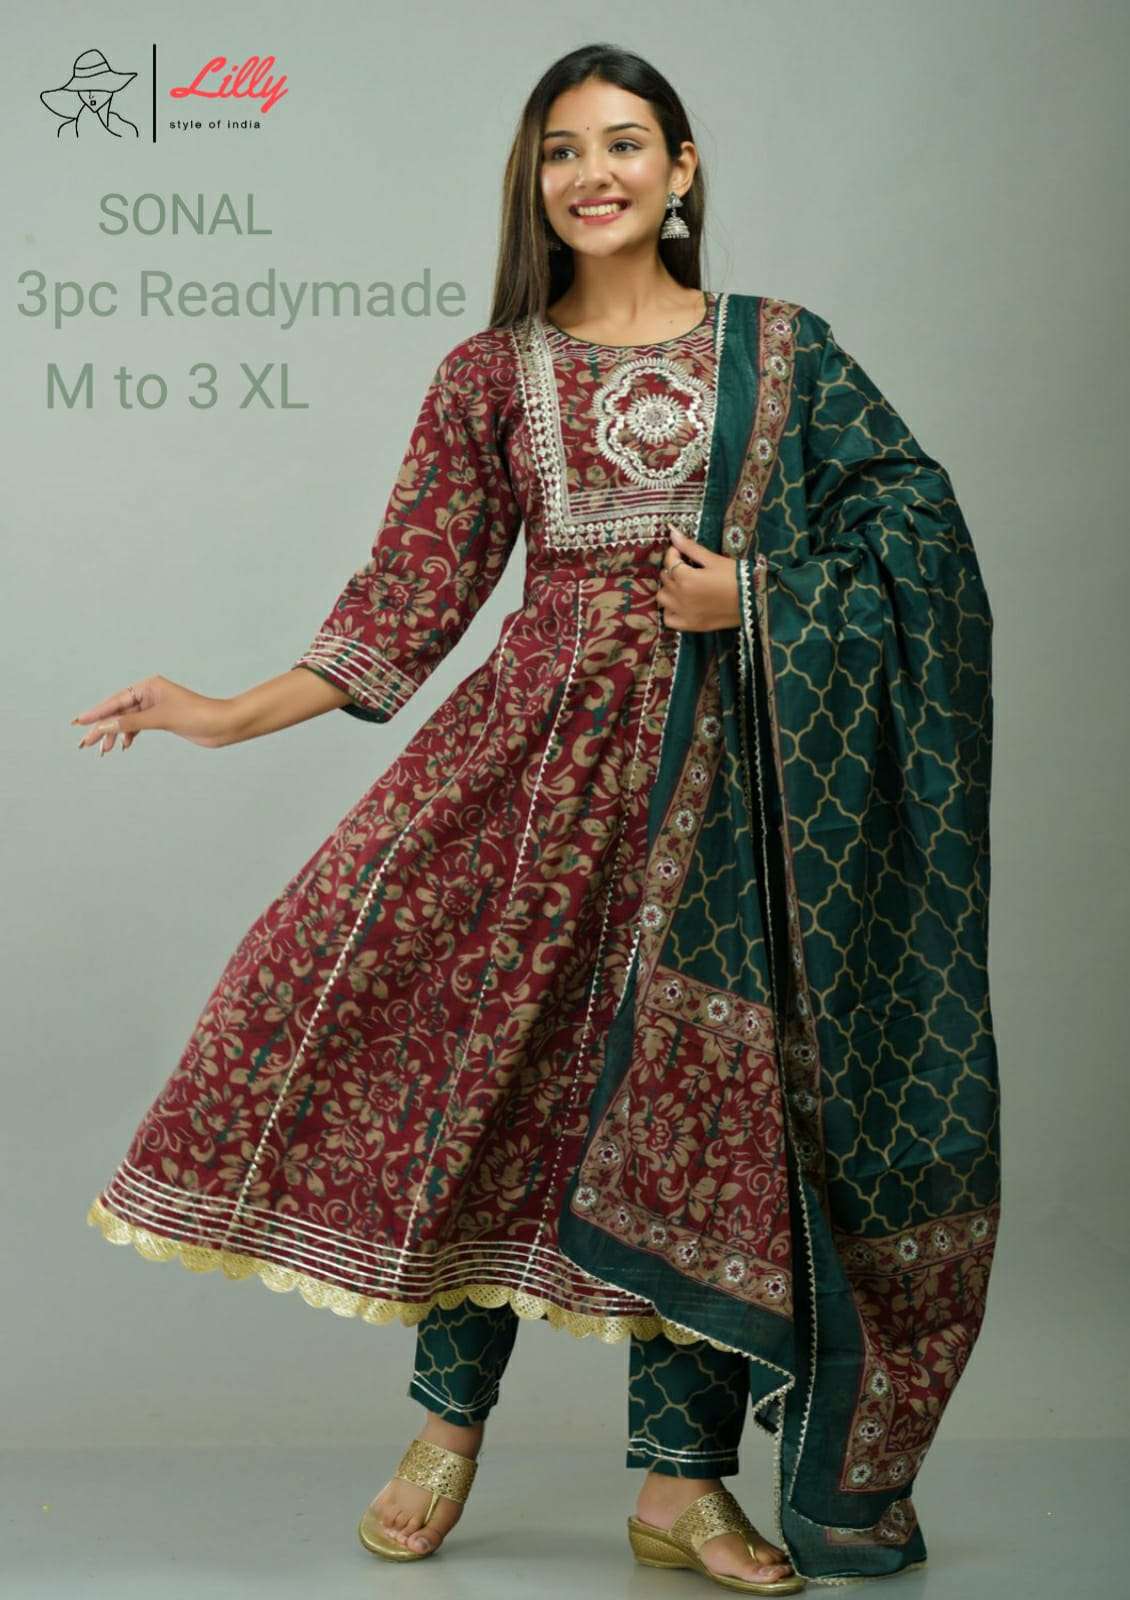 LILY STYLE OF INDIA SONAL DESIGNER HAND CRAFTED WORK WITH LACE GOTA WORK ANARKALI STITCHED SUITS WHOLESALE